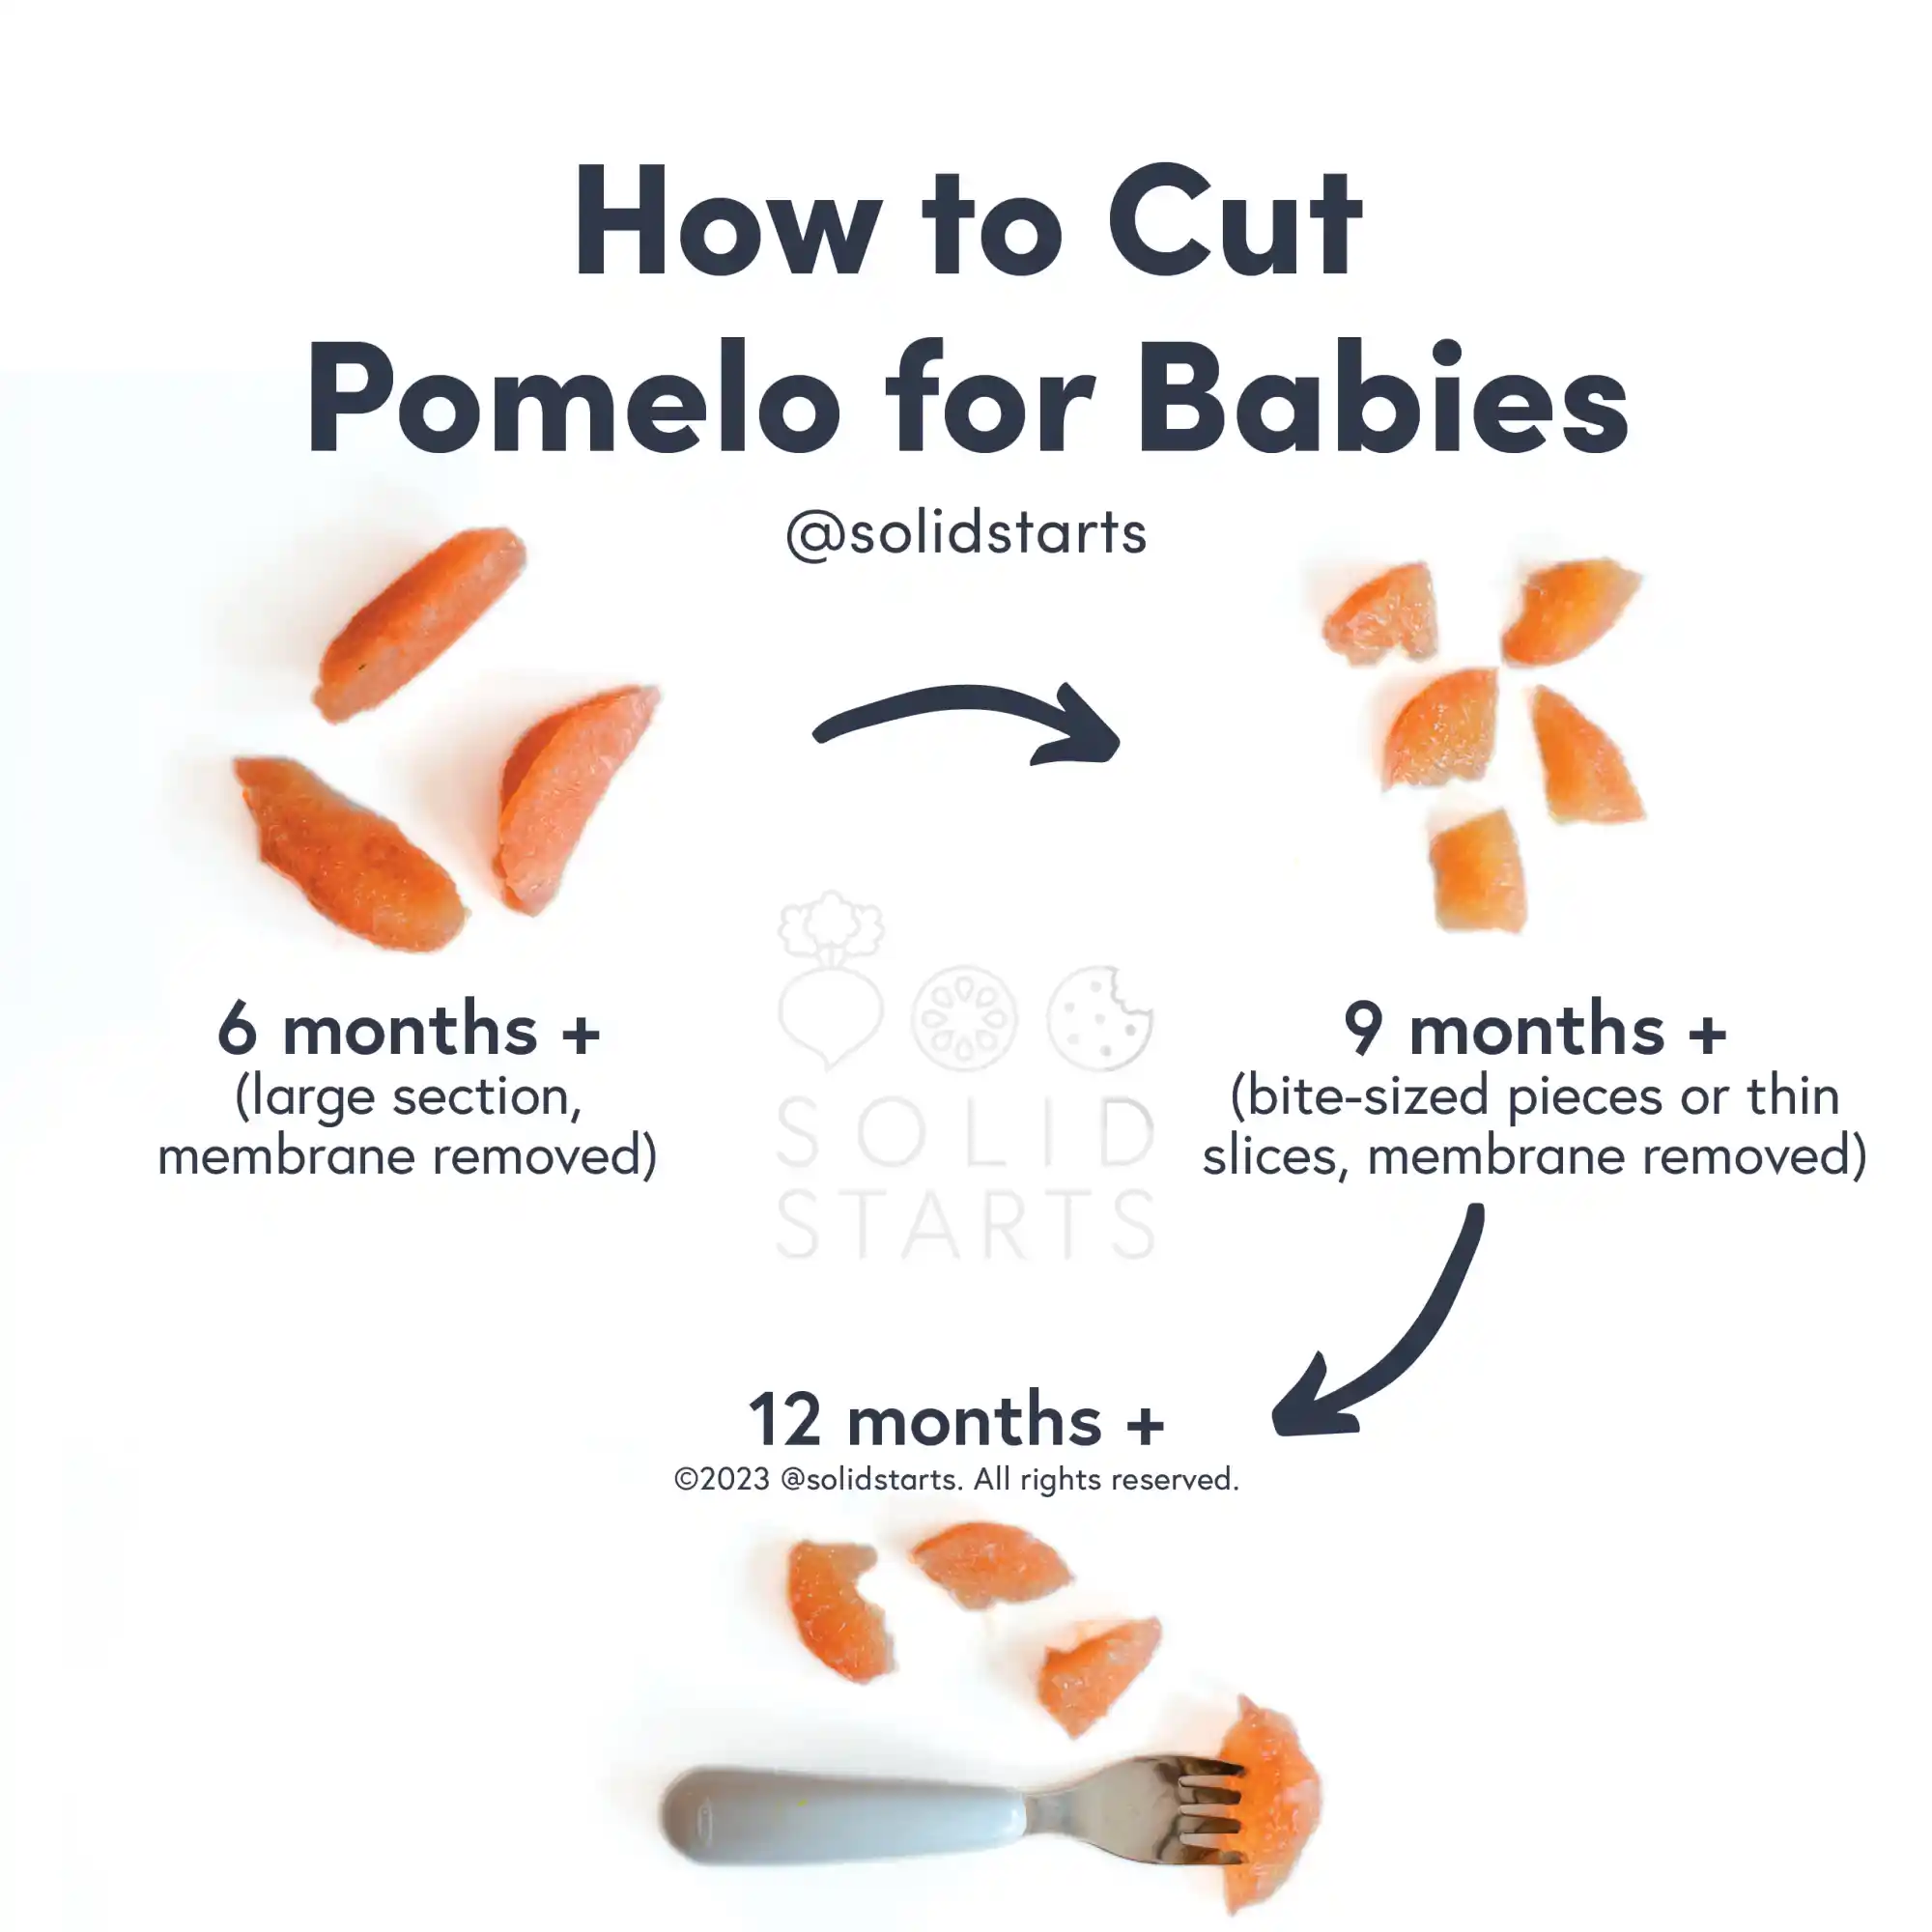 a Solid Starts infographic with the header How to Cut Pomelo for Babies: large section with membrane removed for babies 6 months+, bite-sized pieces or thin slices, membrane removed for 9 months+, bite-sized pieces with a utensil for toddlers 12 mos+